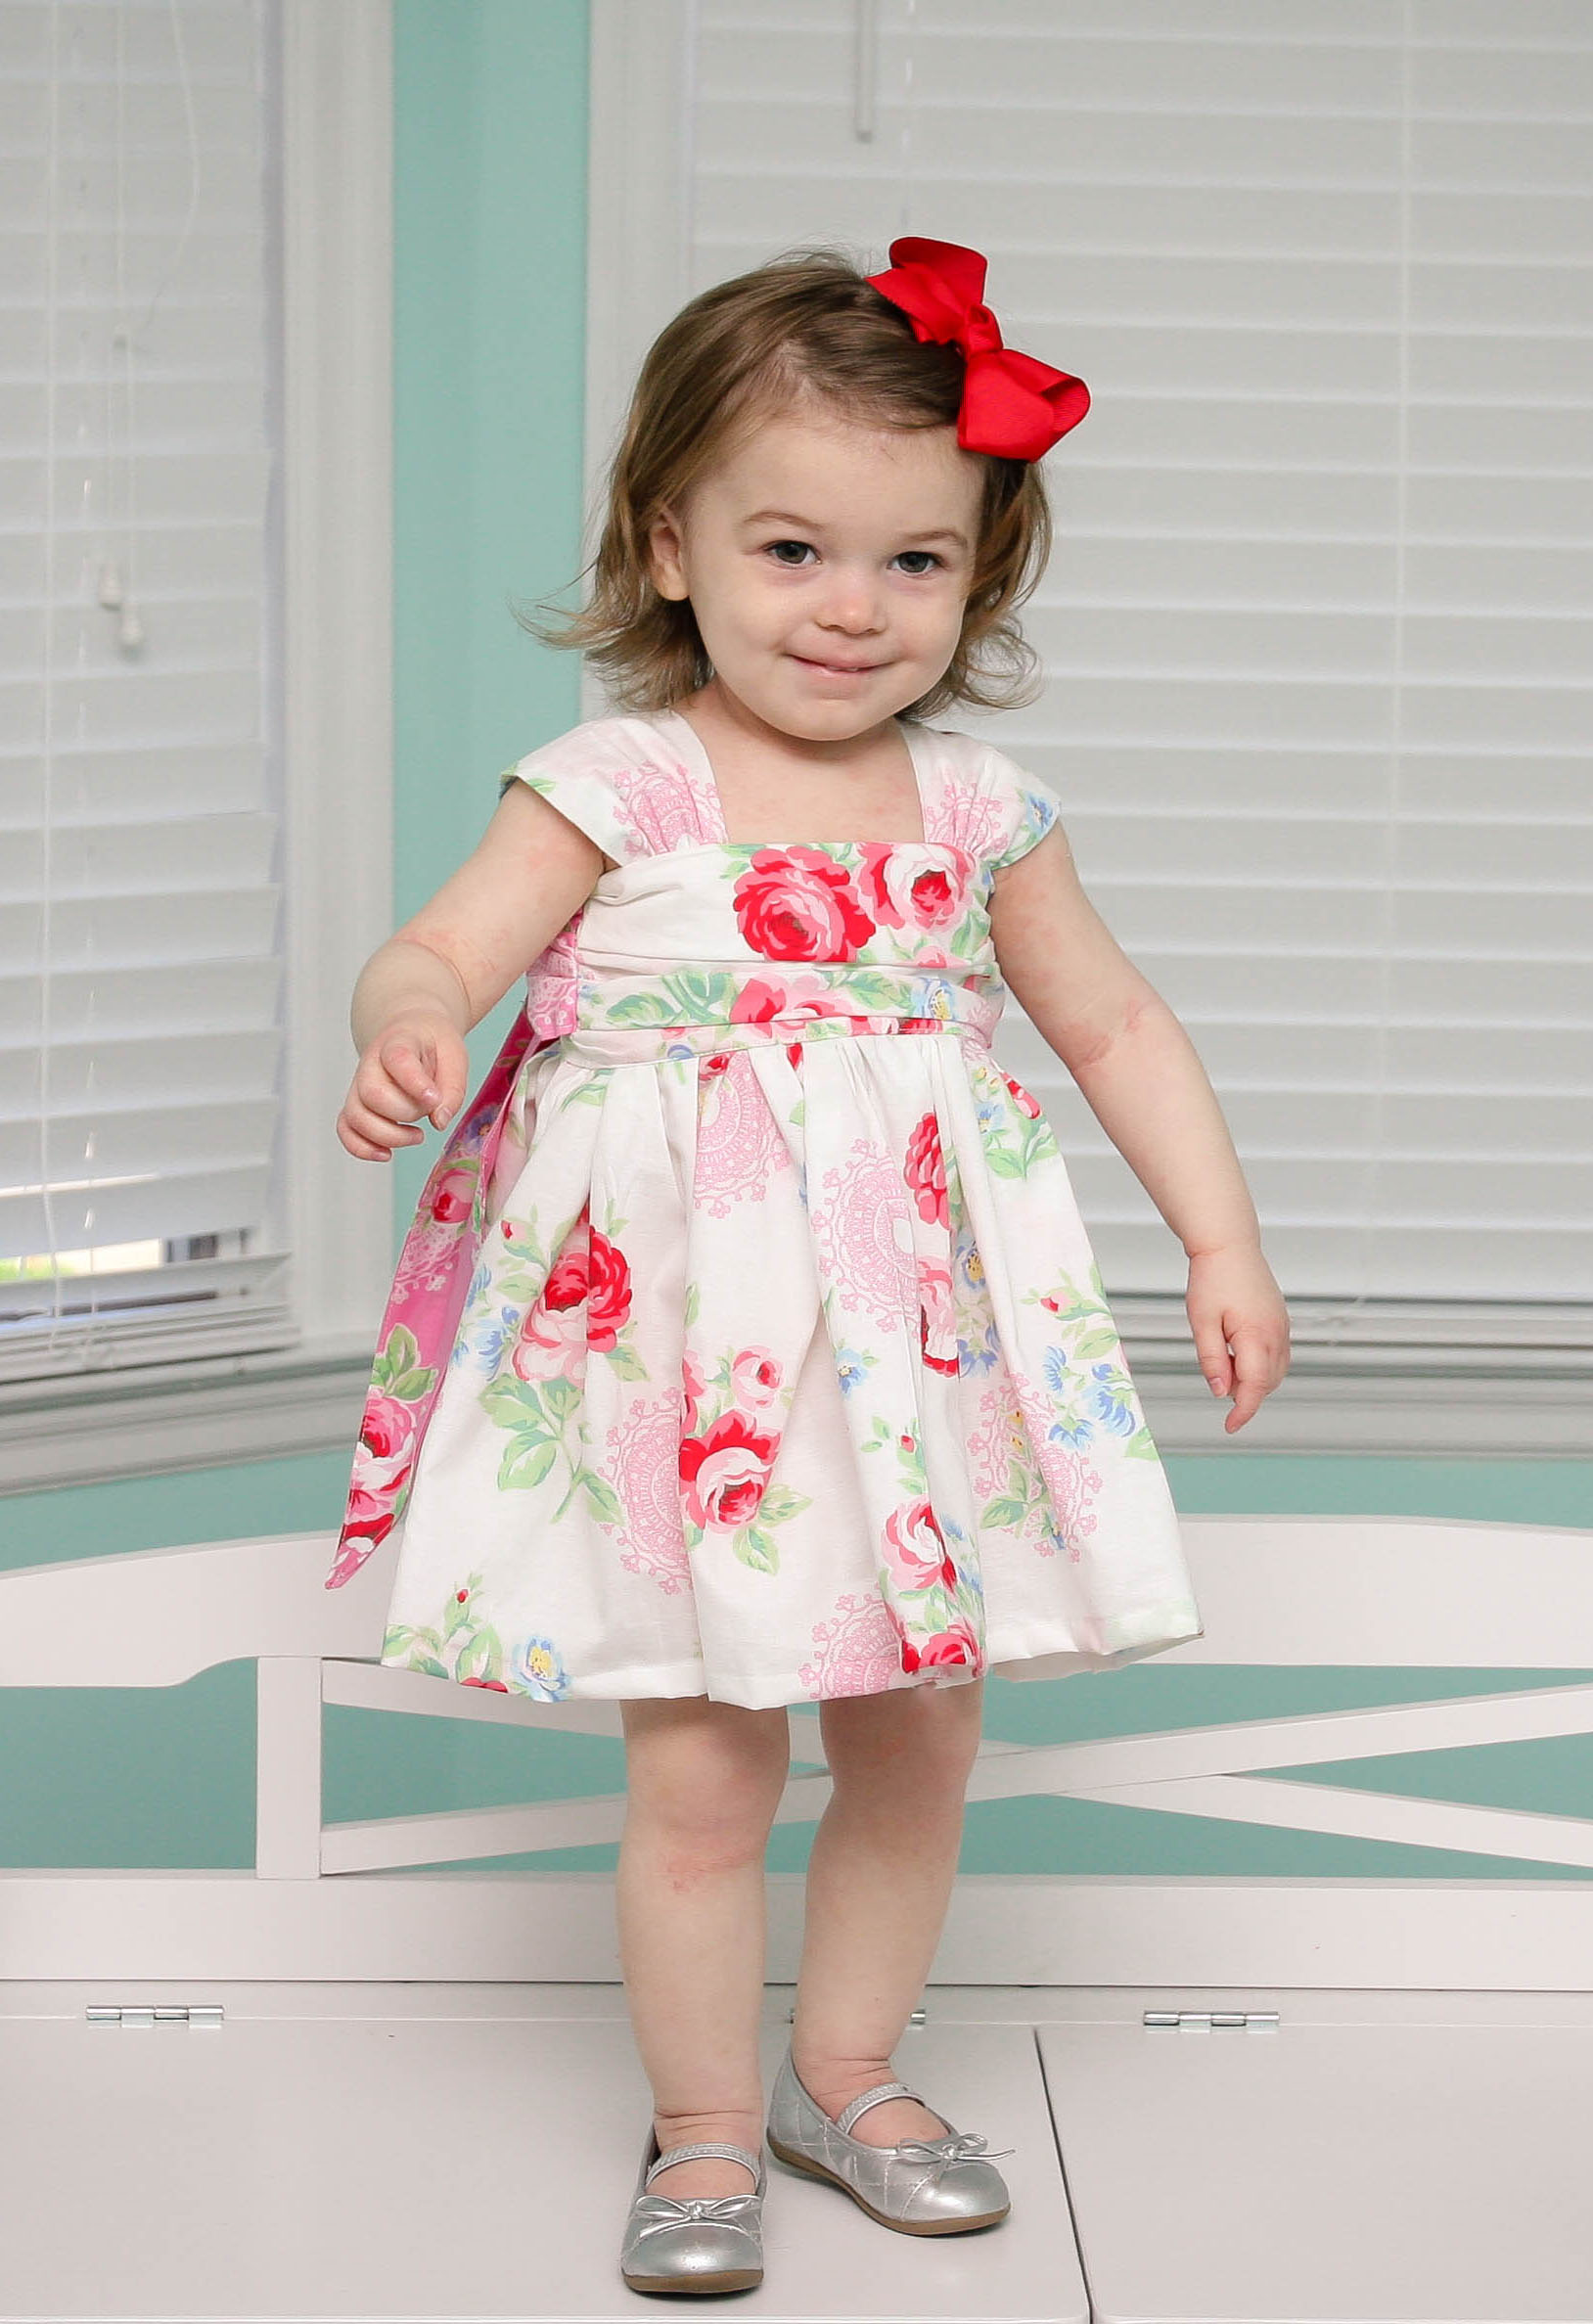 Maxine's Top, Dress, and Maxi NB to 15/16 Kids and Dolls PDF Pattern